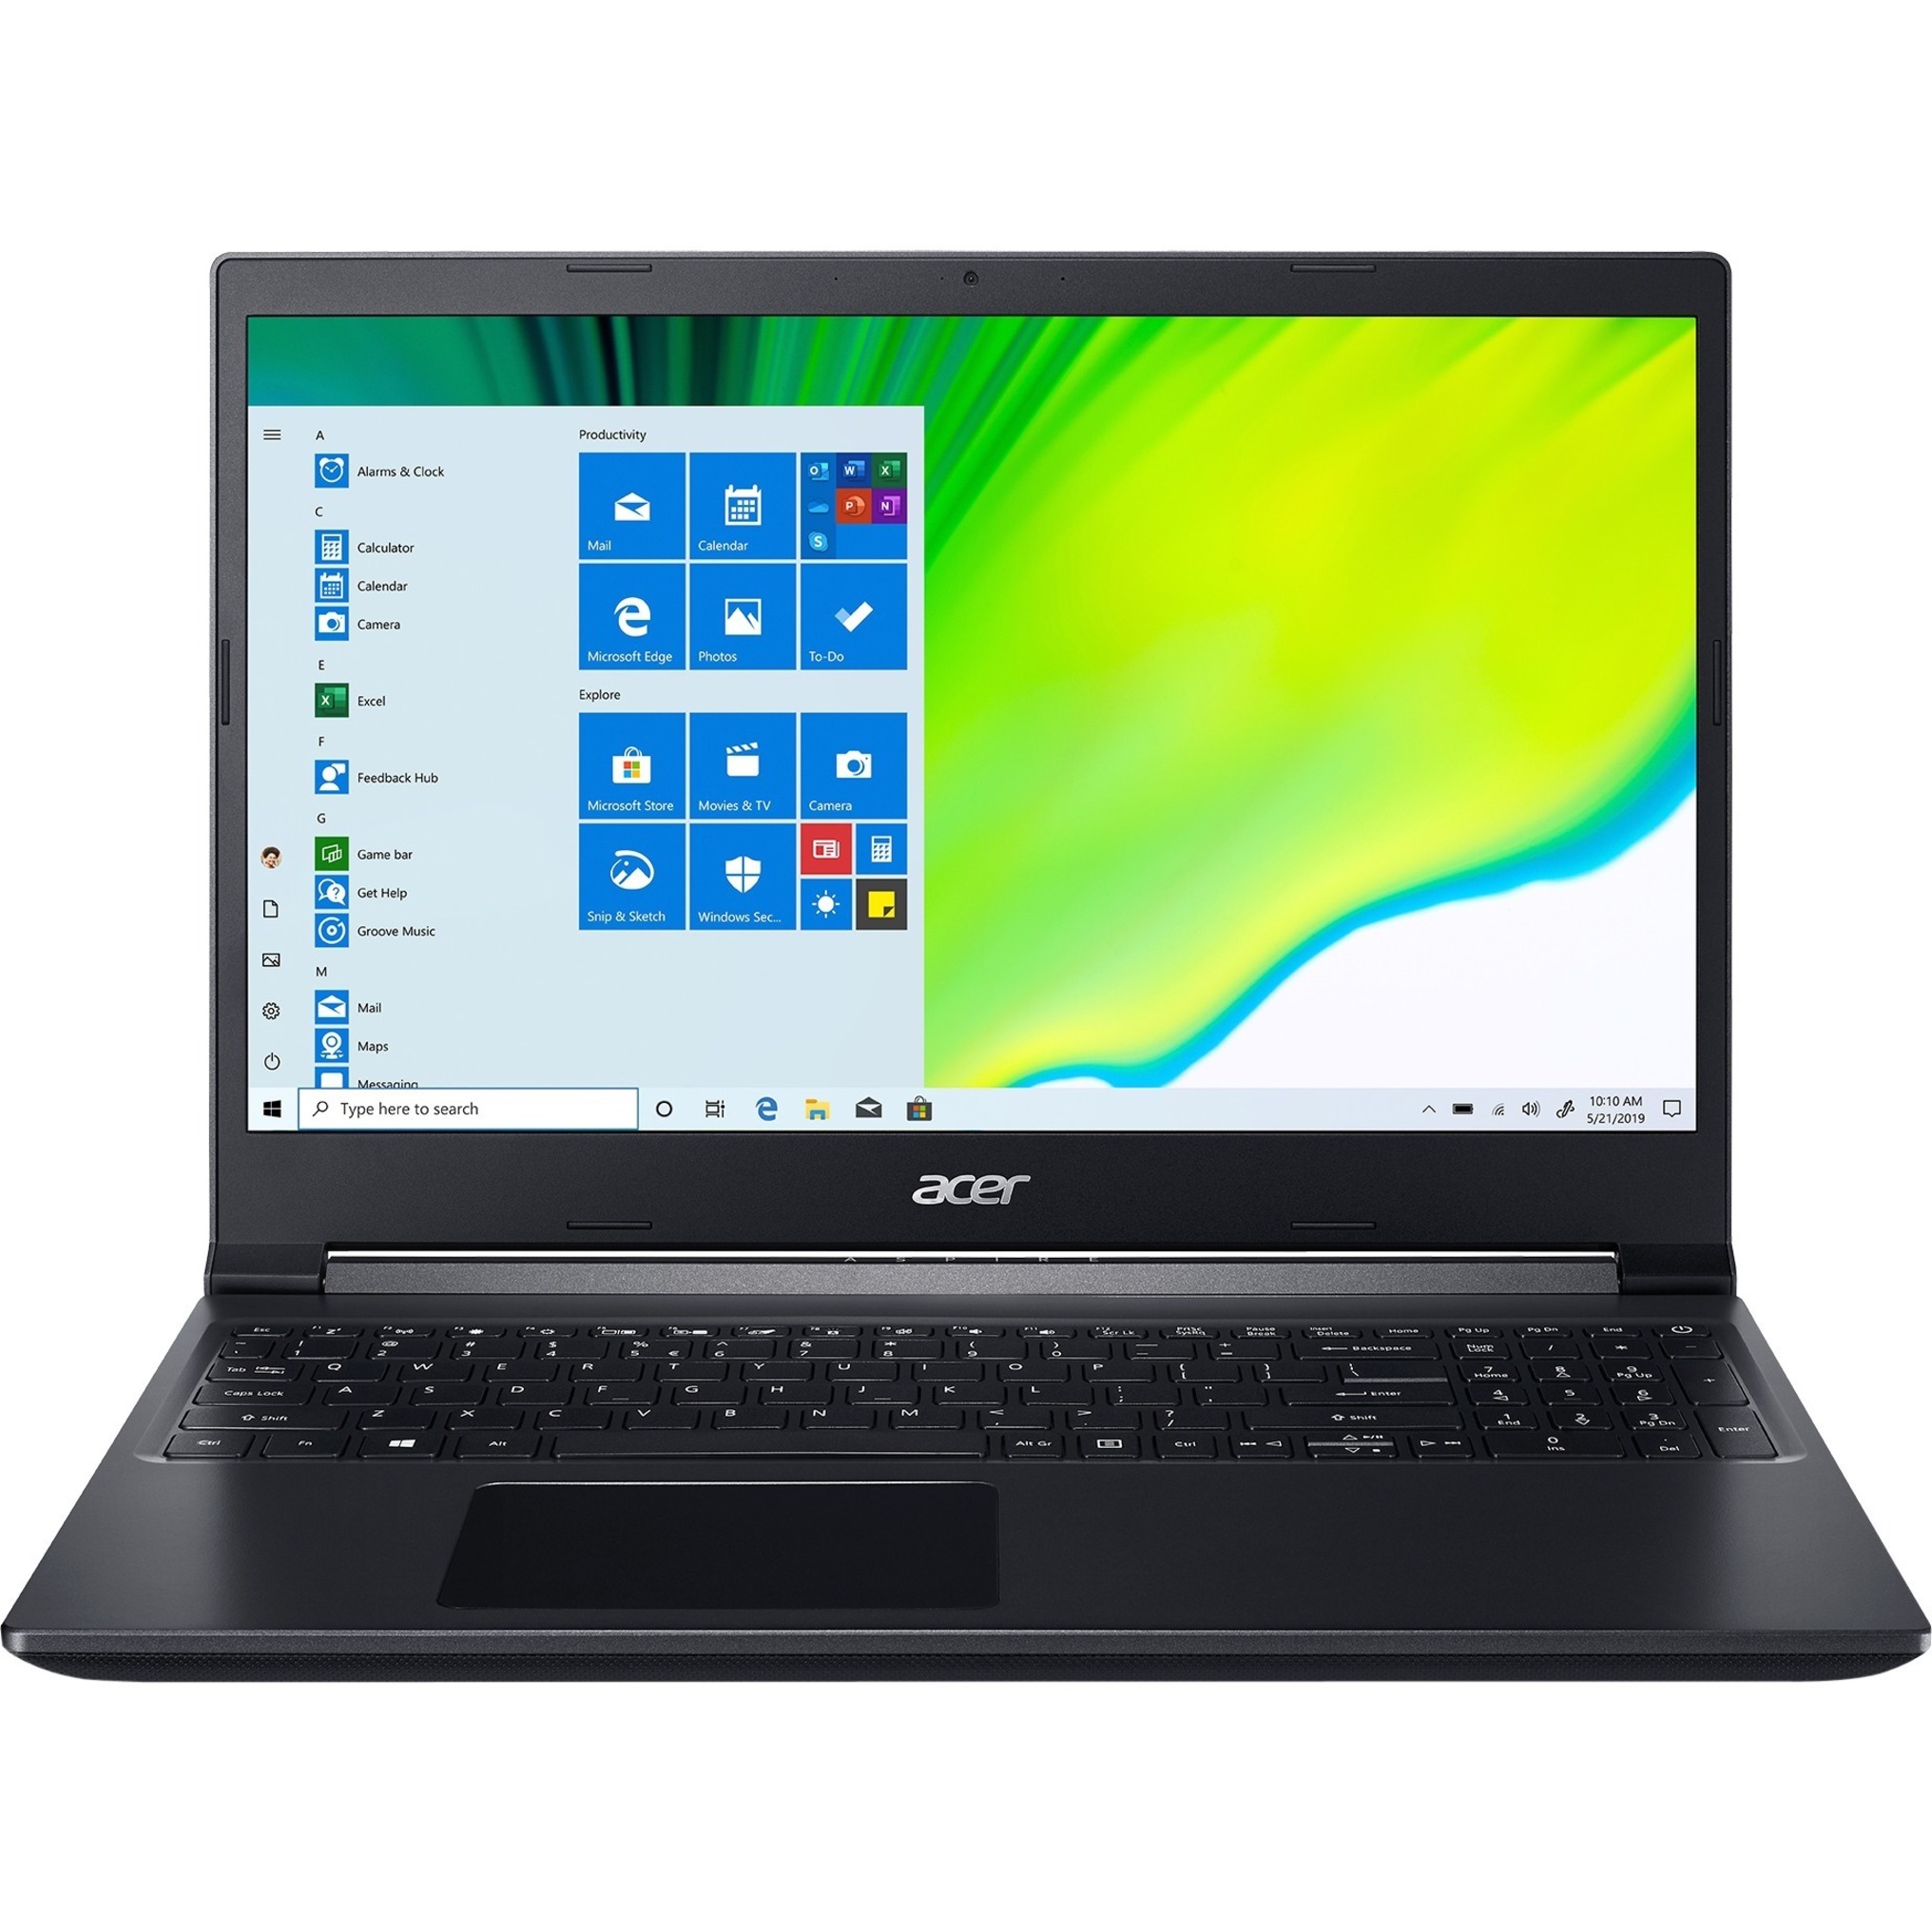 Acer Aspire 7 15.6" Full HD Laptop, Intel Core i5 i5-9300H, 512GB SSD, Windows 10 Home, A715-75G-544V - image 4 of 9